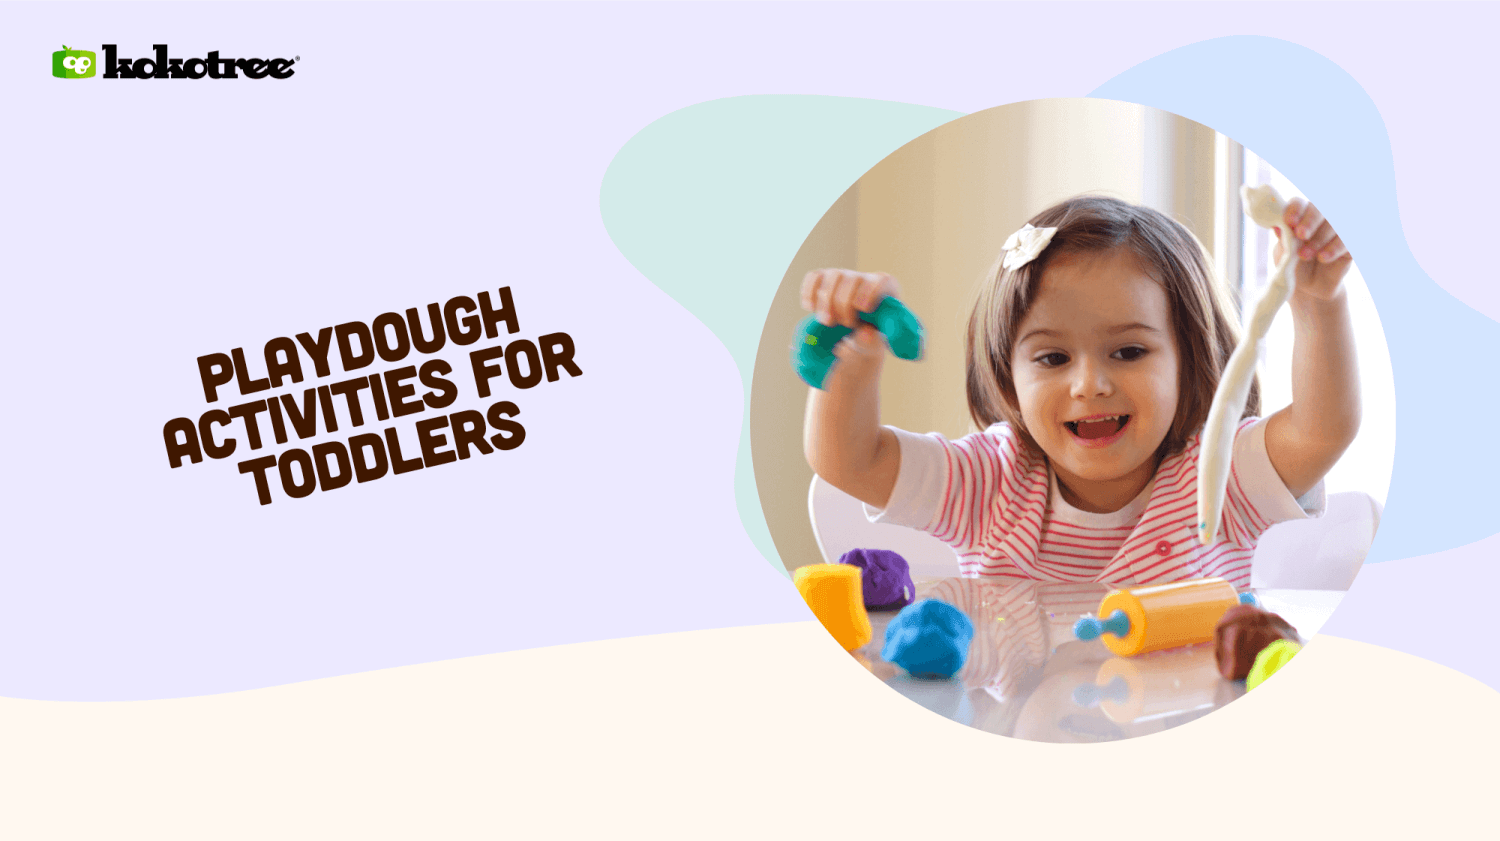 playdough activities for toddlers